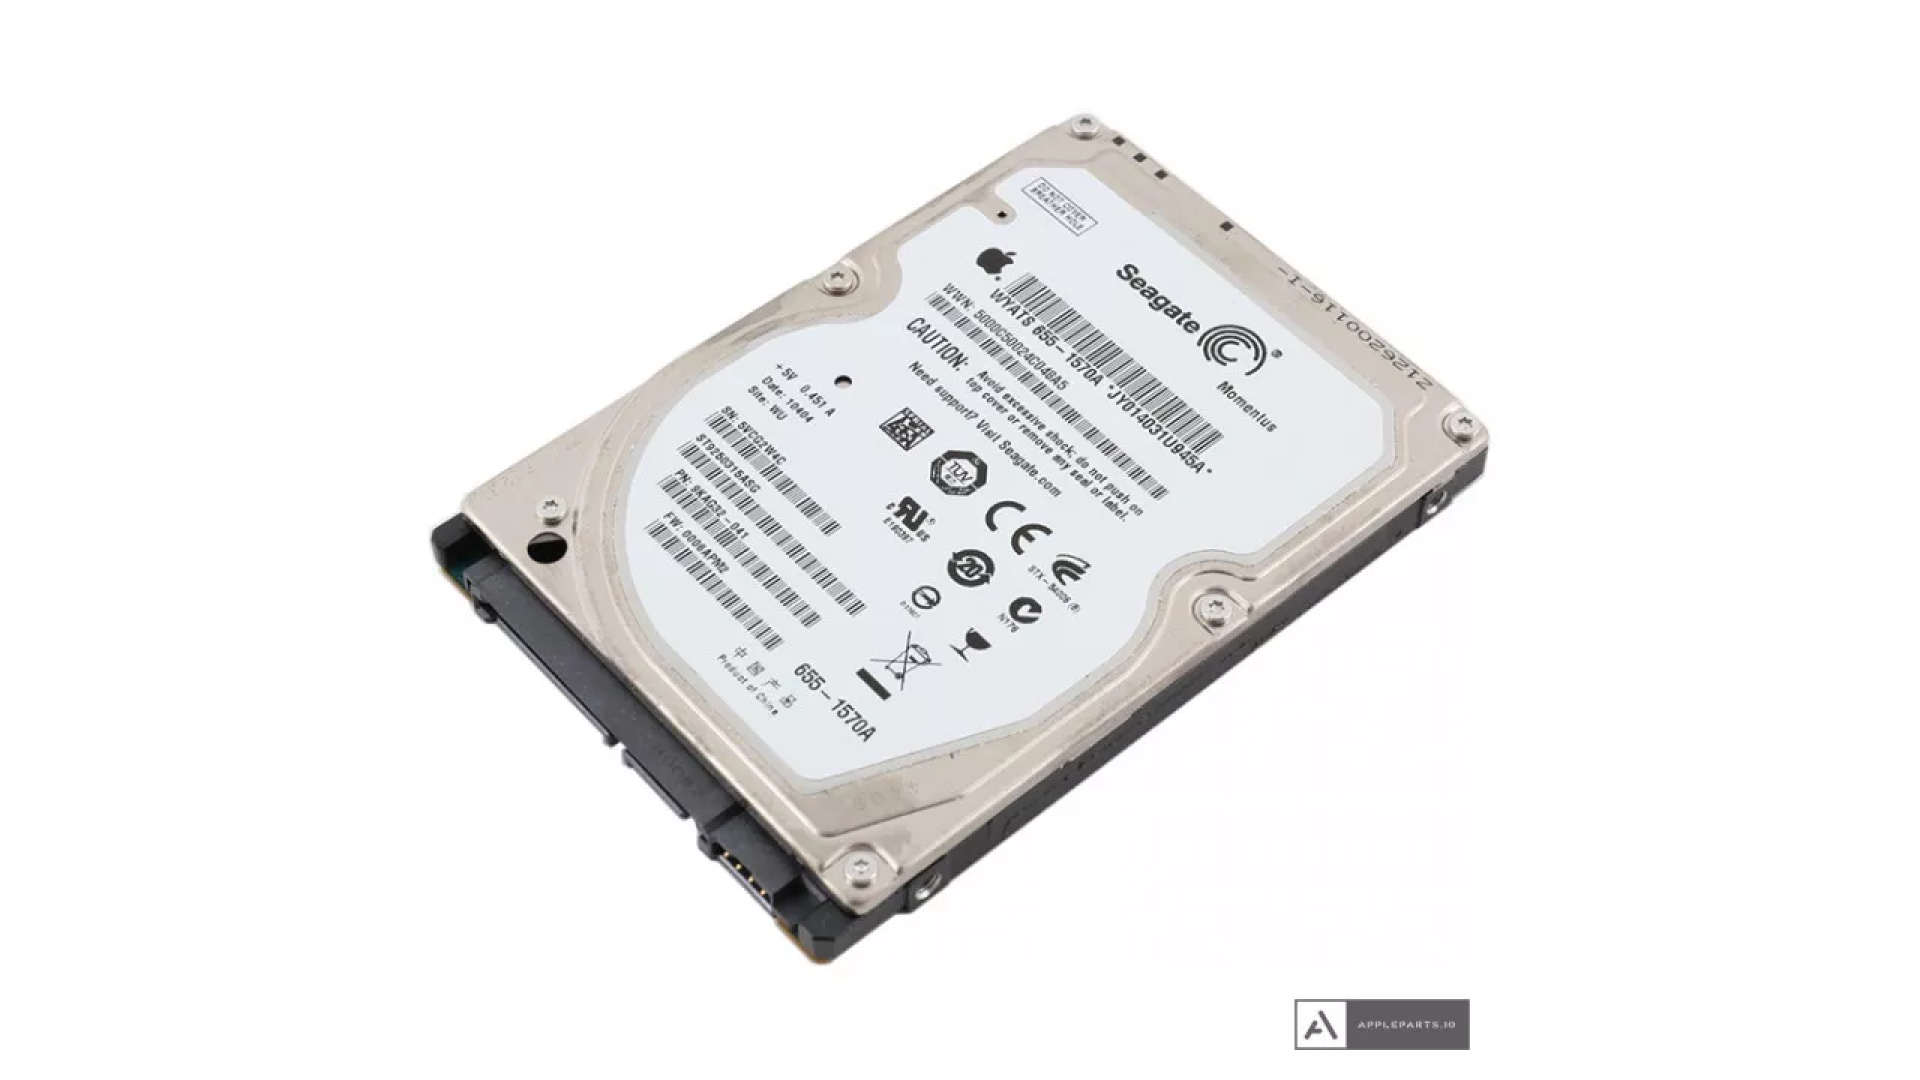 Easy-to-Use Guide to MacBook Pro Hard Drive Replacement